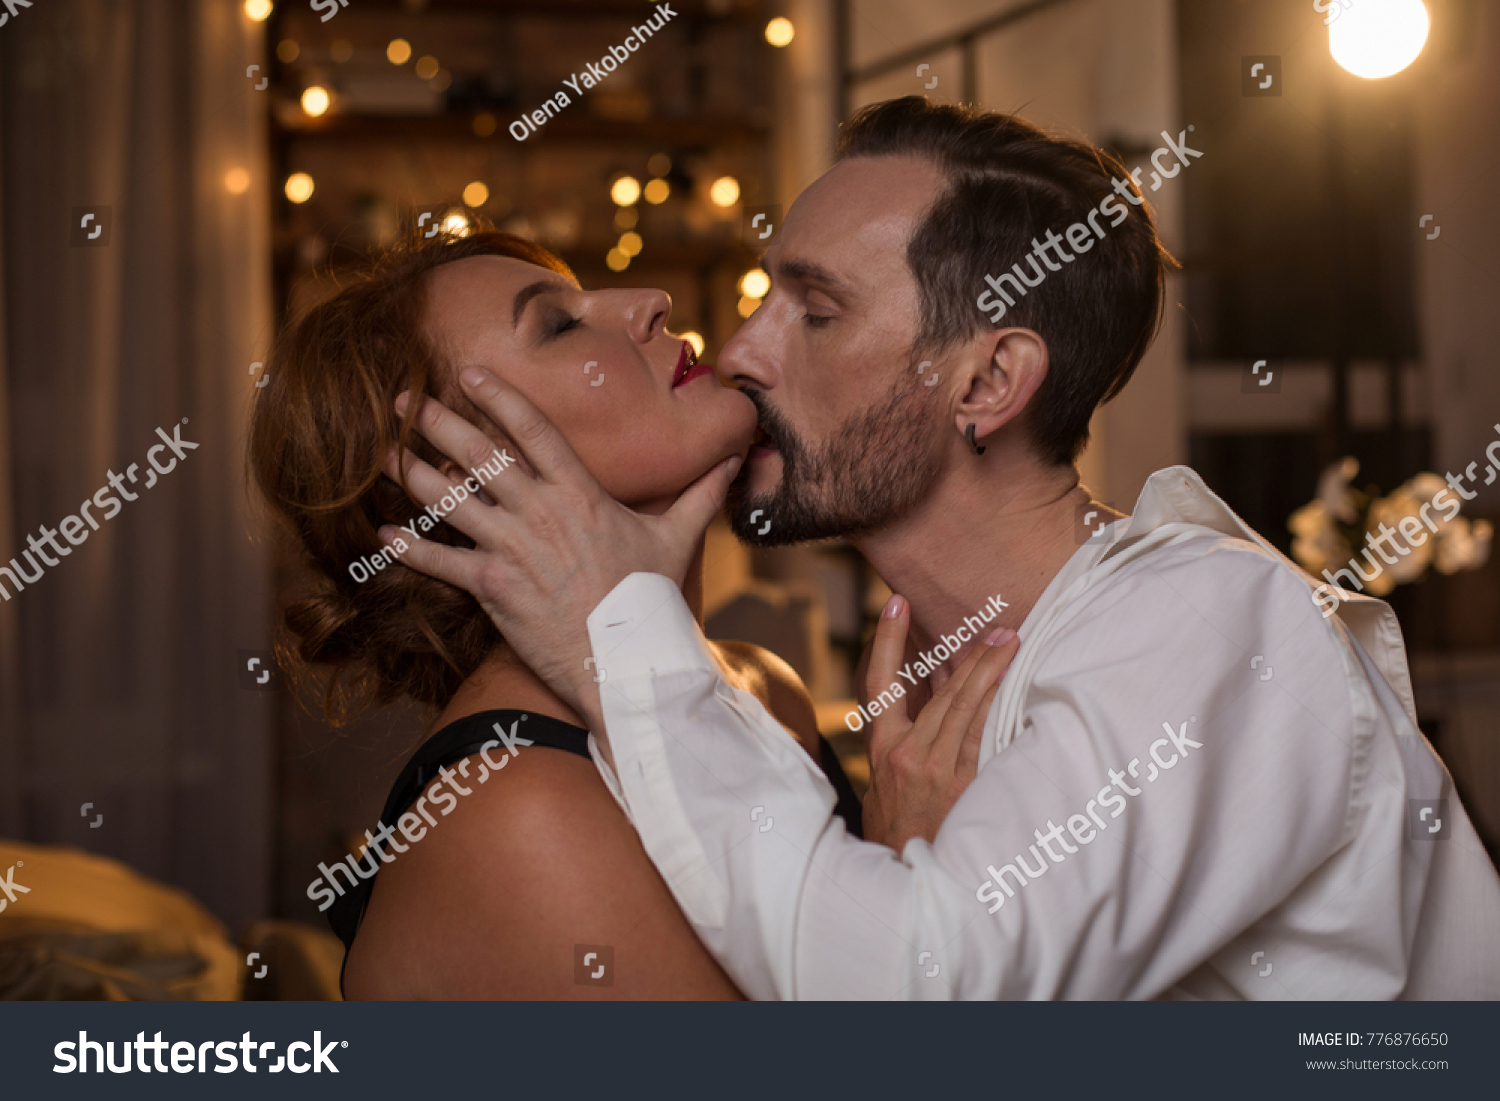 Profile of passionate bearded man kissing woman with desire while touching her face gently. Female eyes are closed with pleasure. Closeness concept #776876650